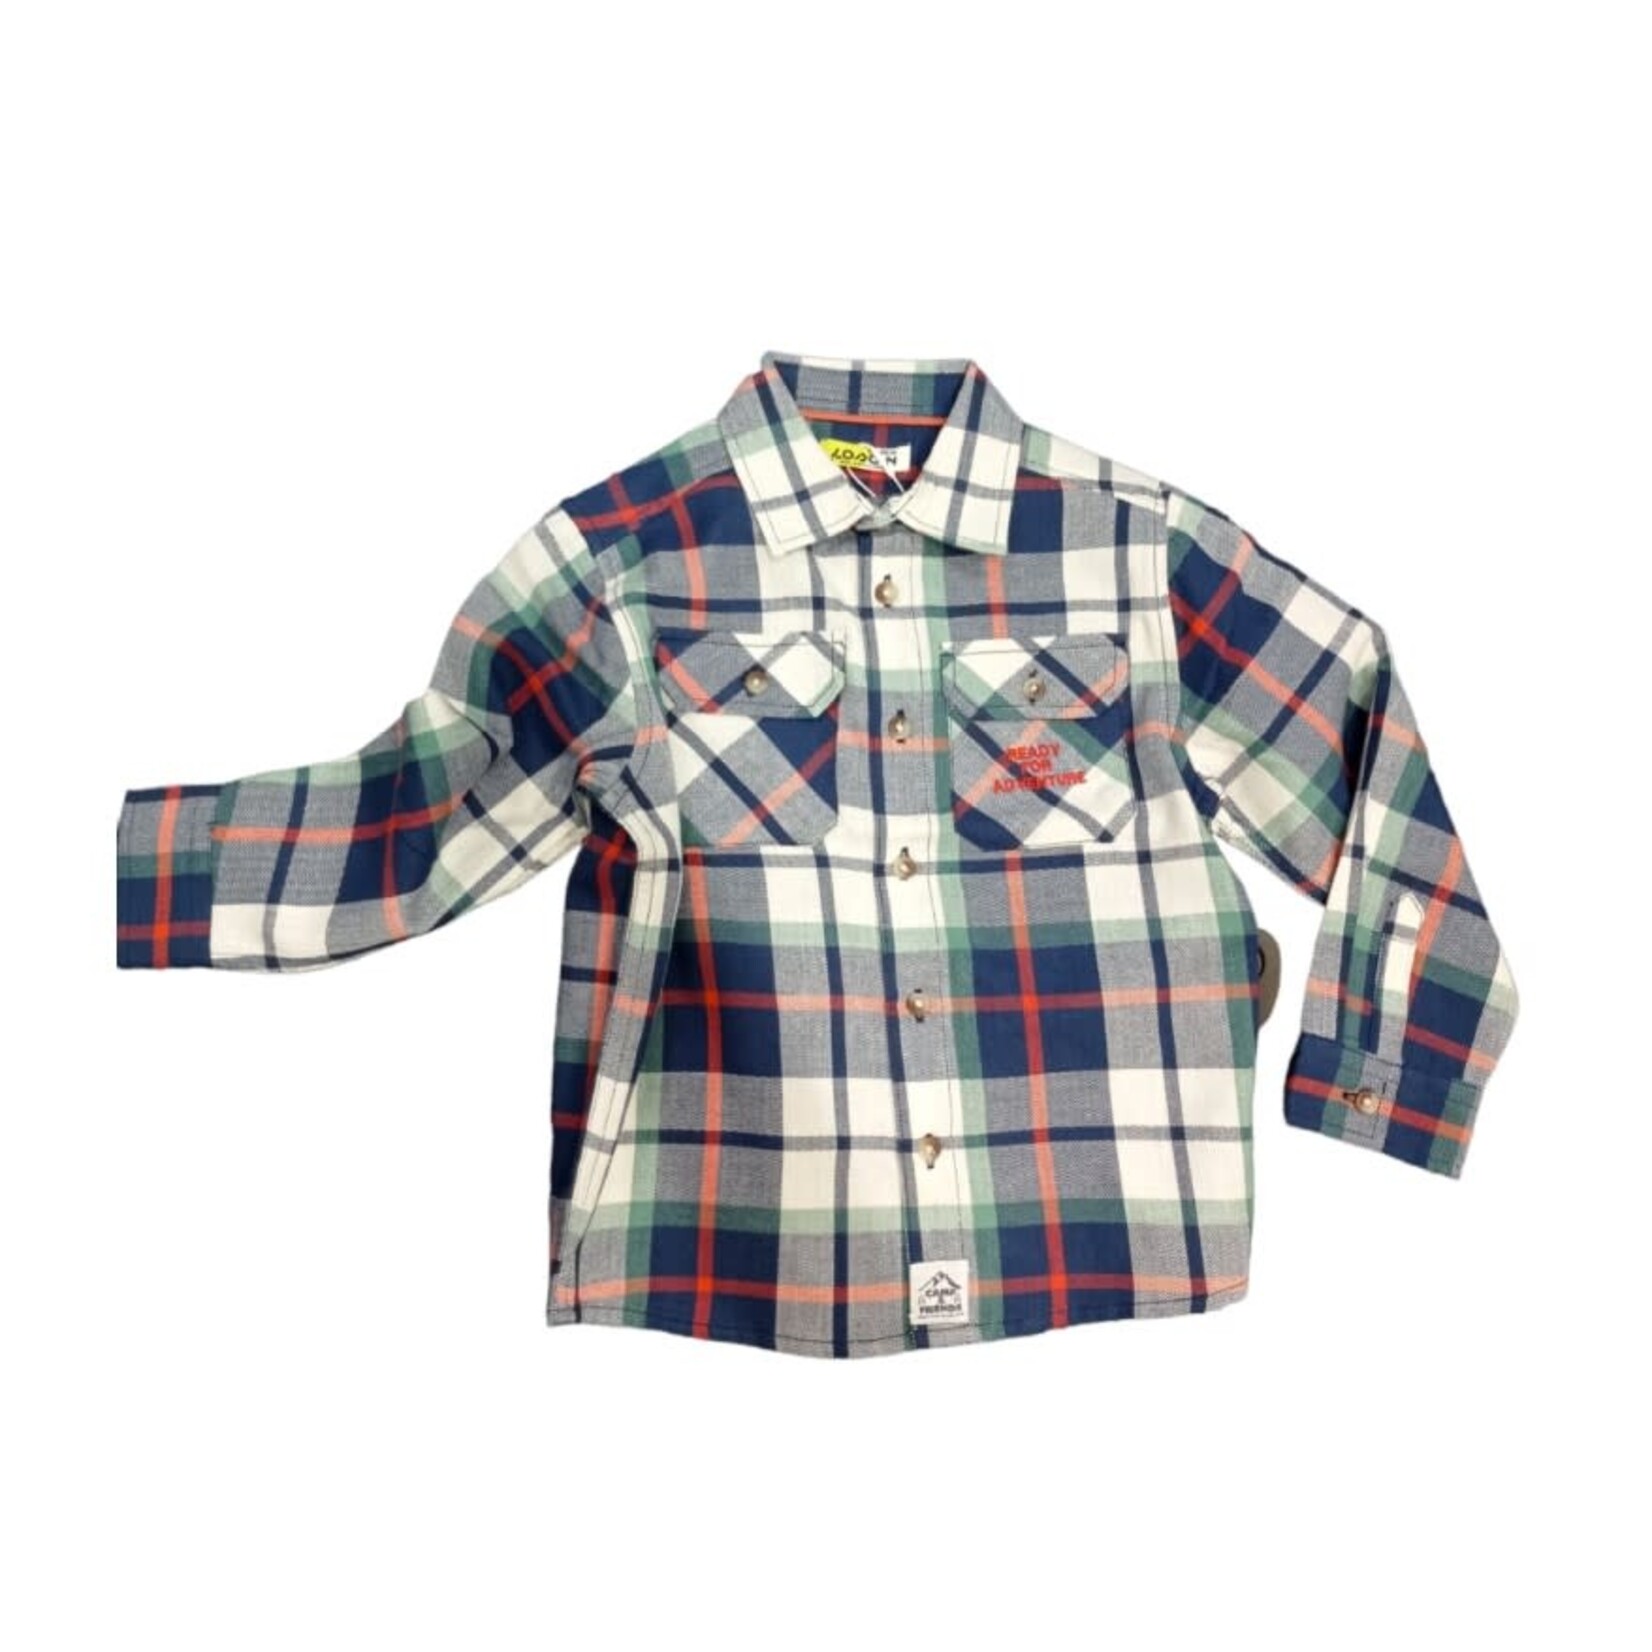 Losan LOSAN - Plaid shirt in red, navy and green 'Ready for adventure'